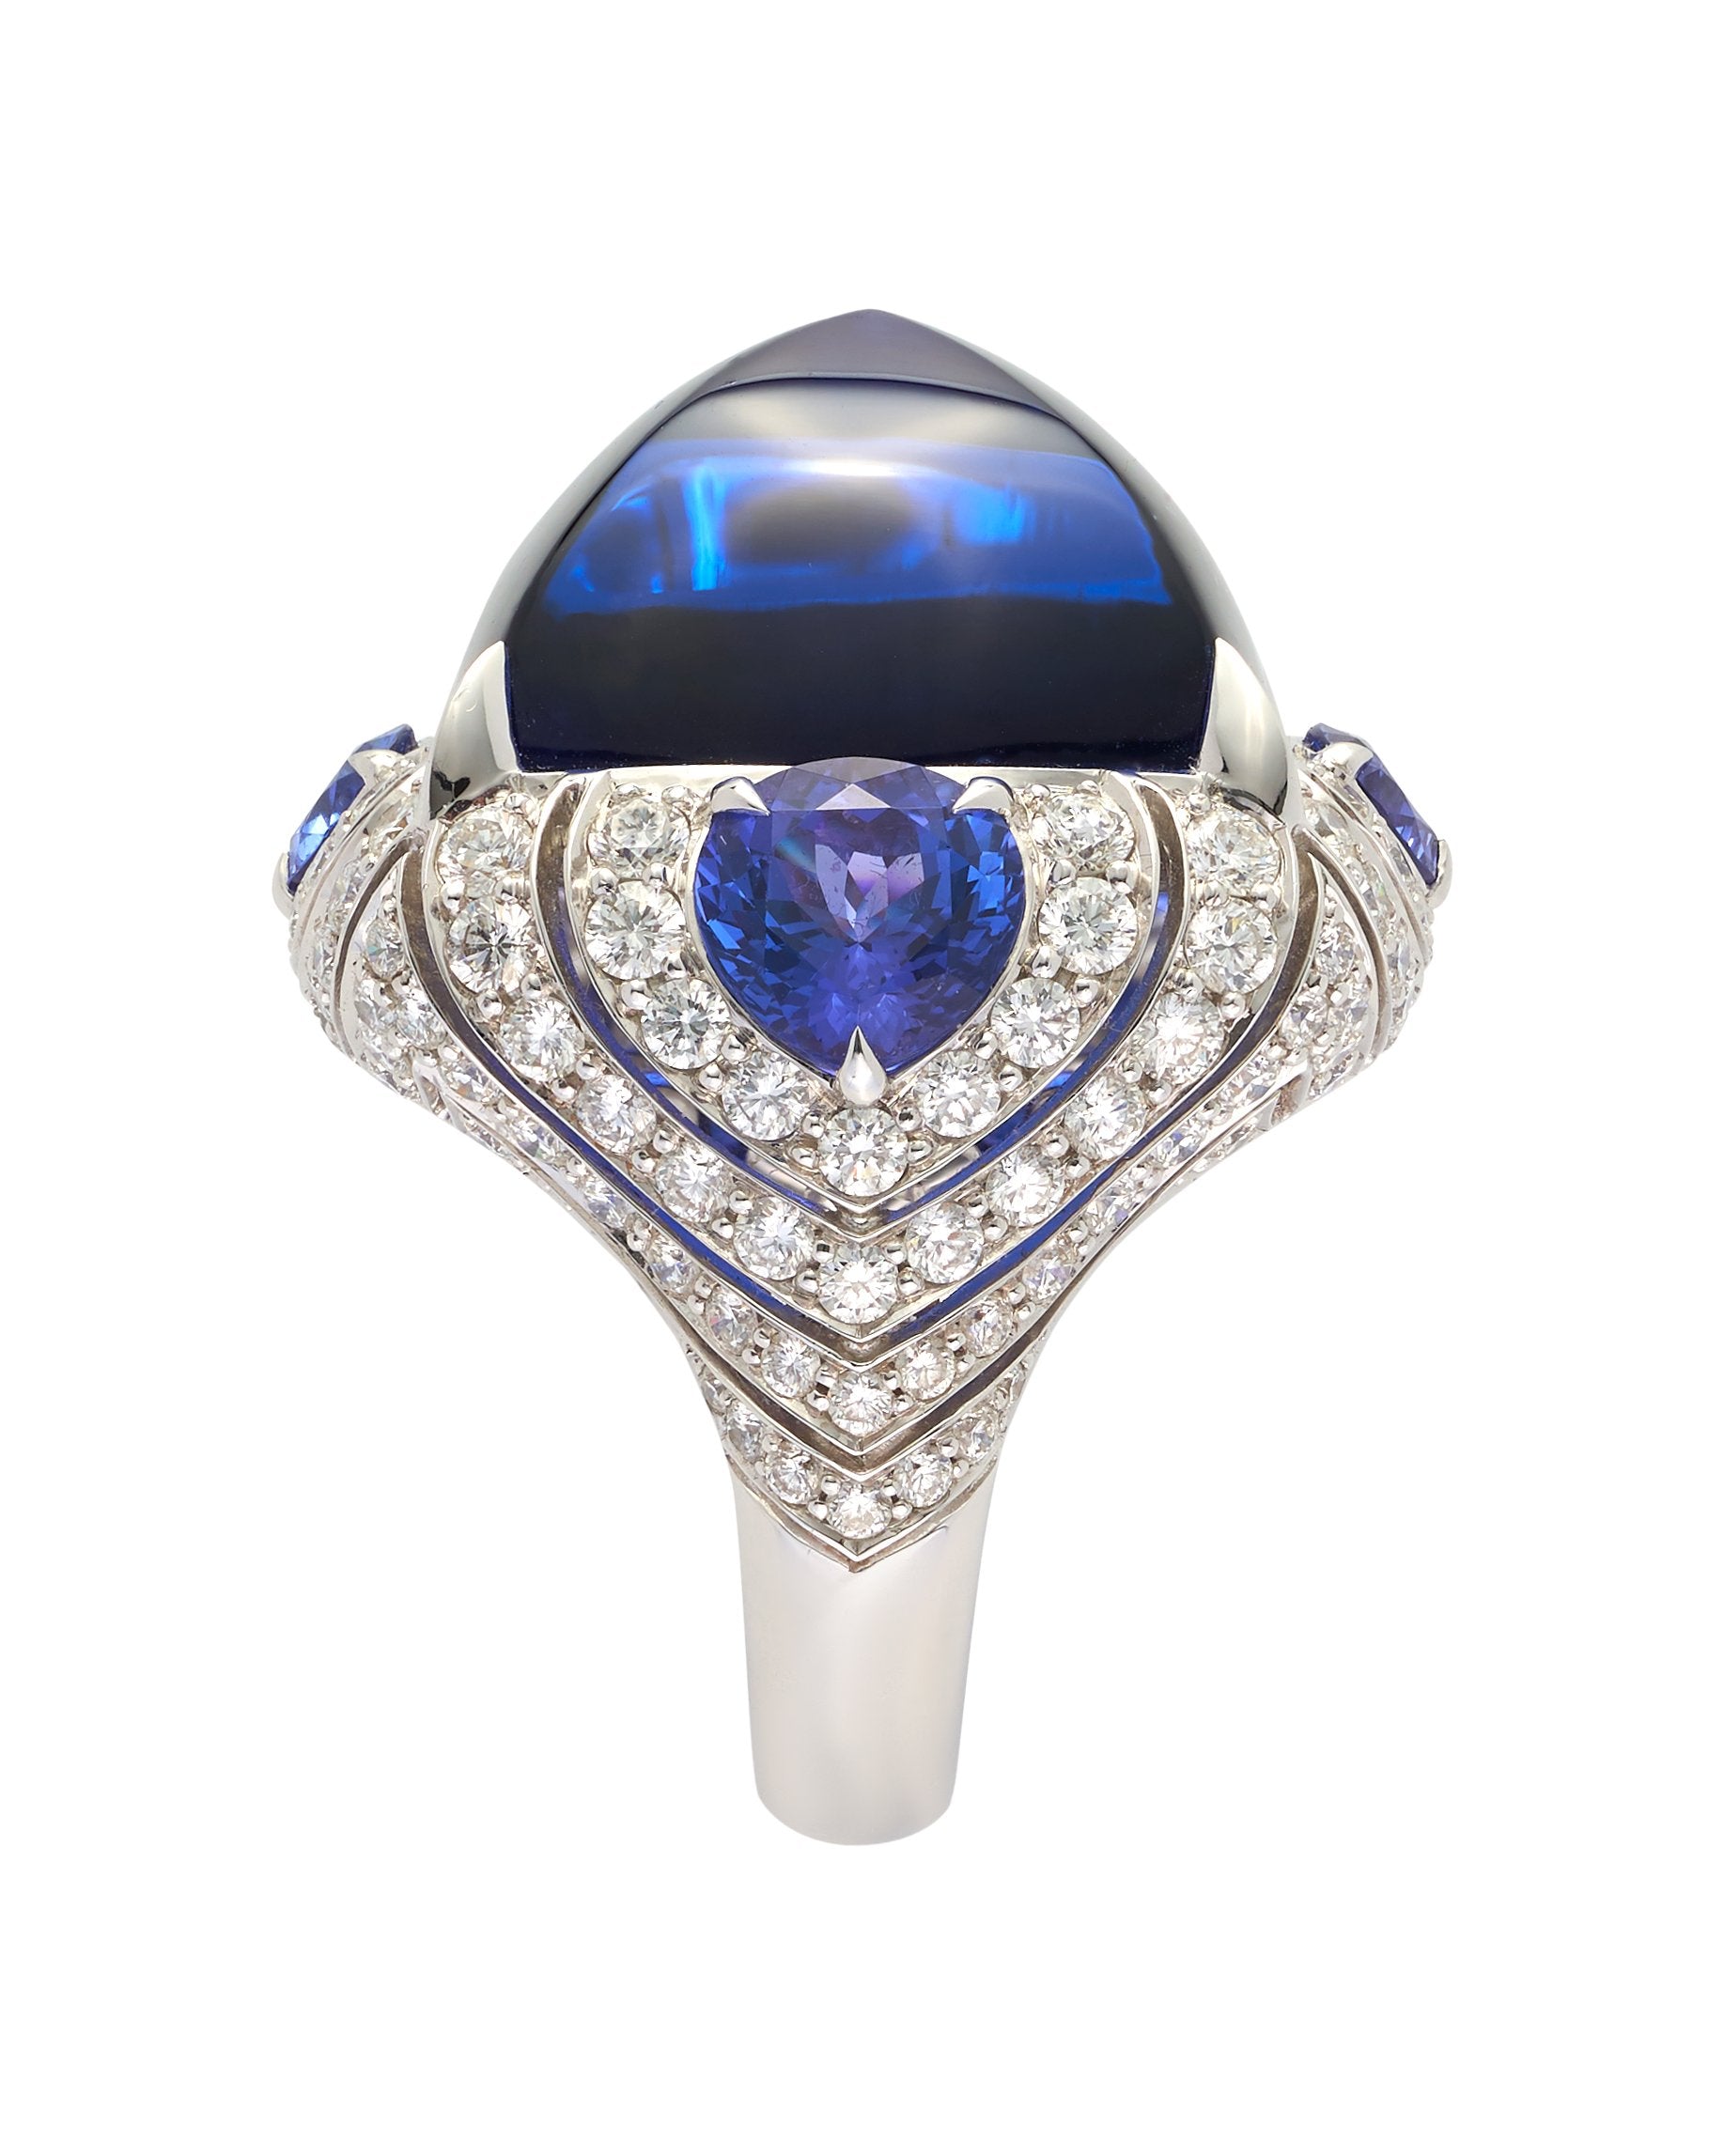 Cabochon tanzanite ring set with diamonds, crafted in 18 karat white gold.